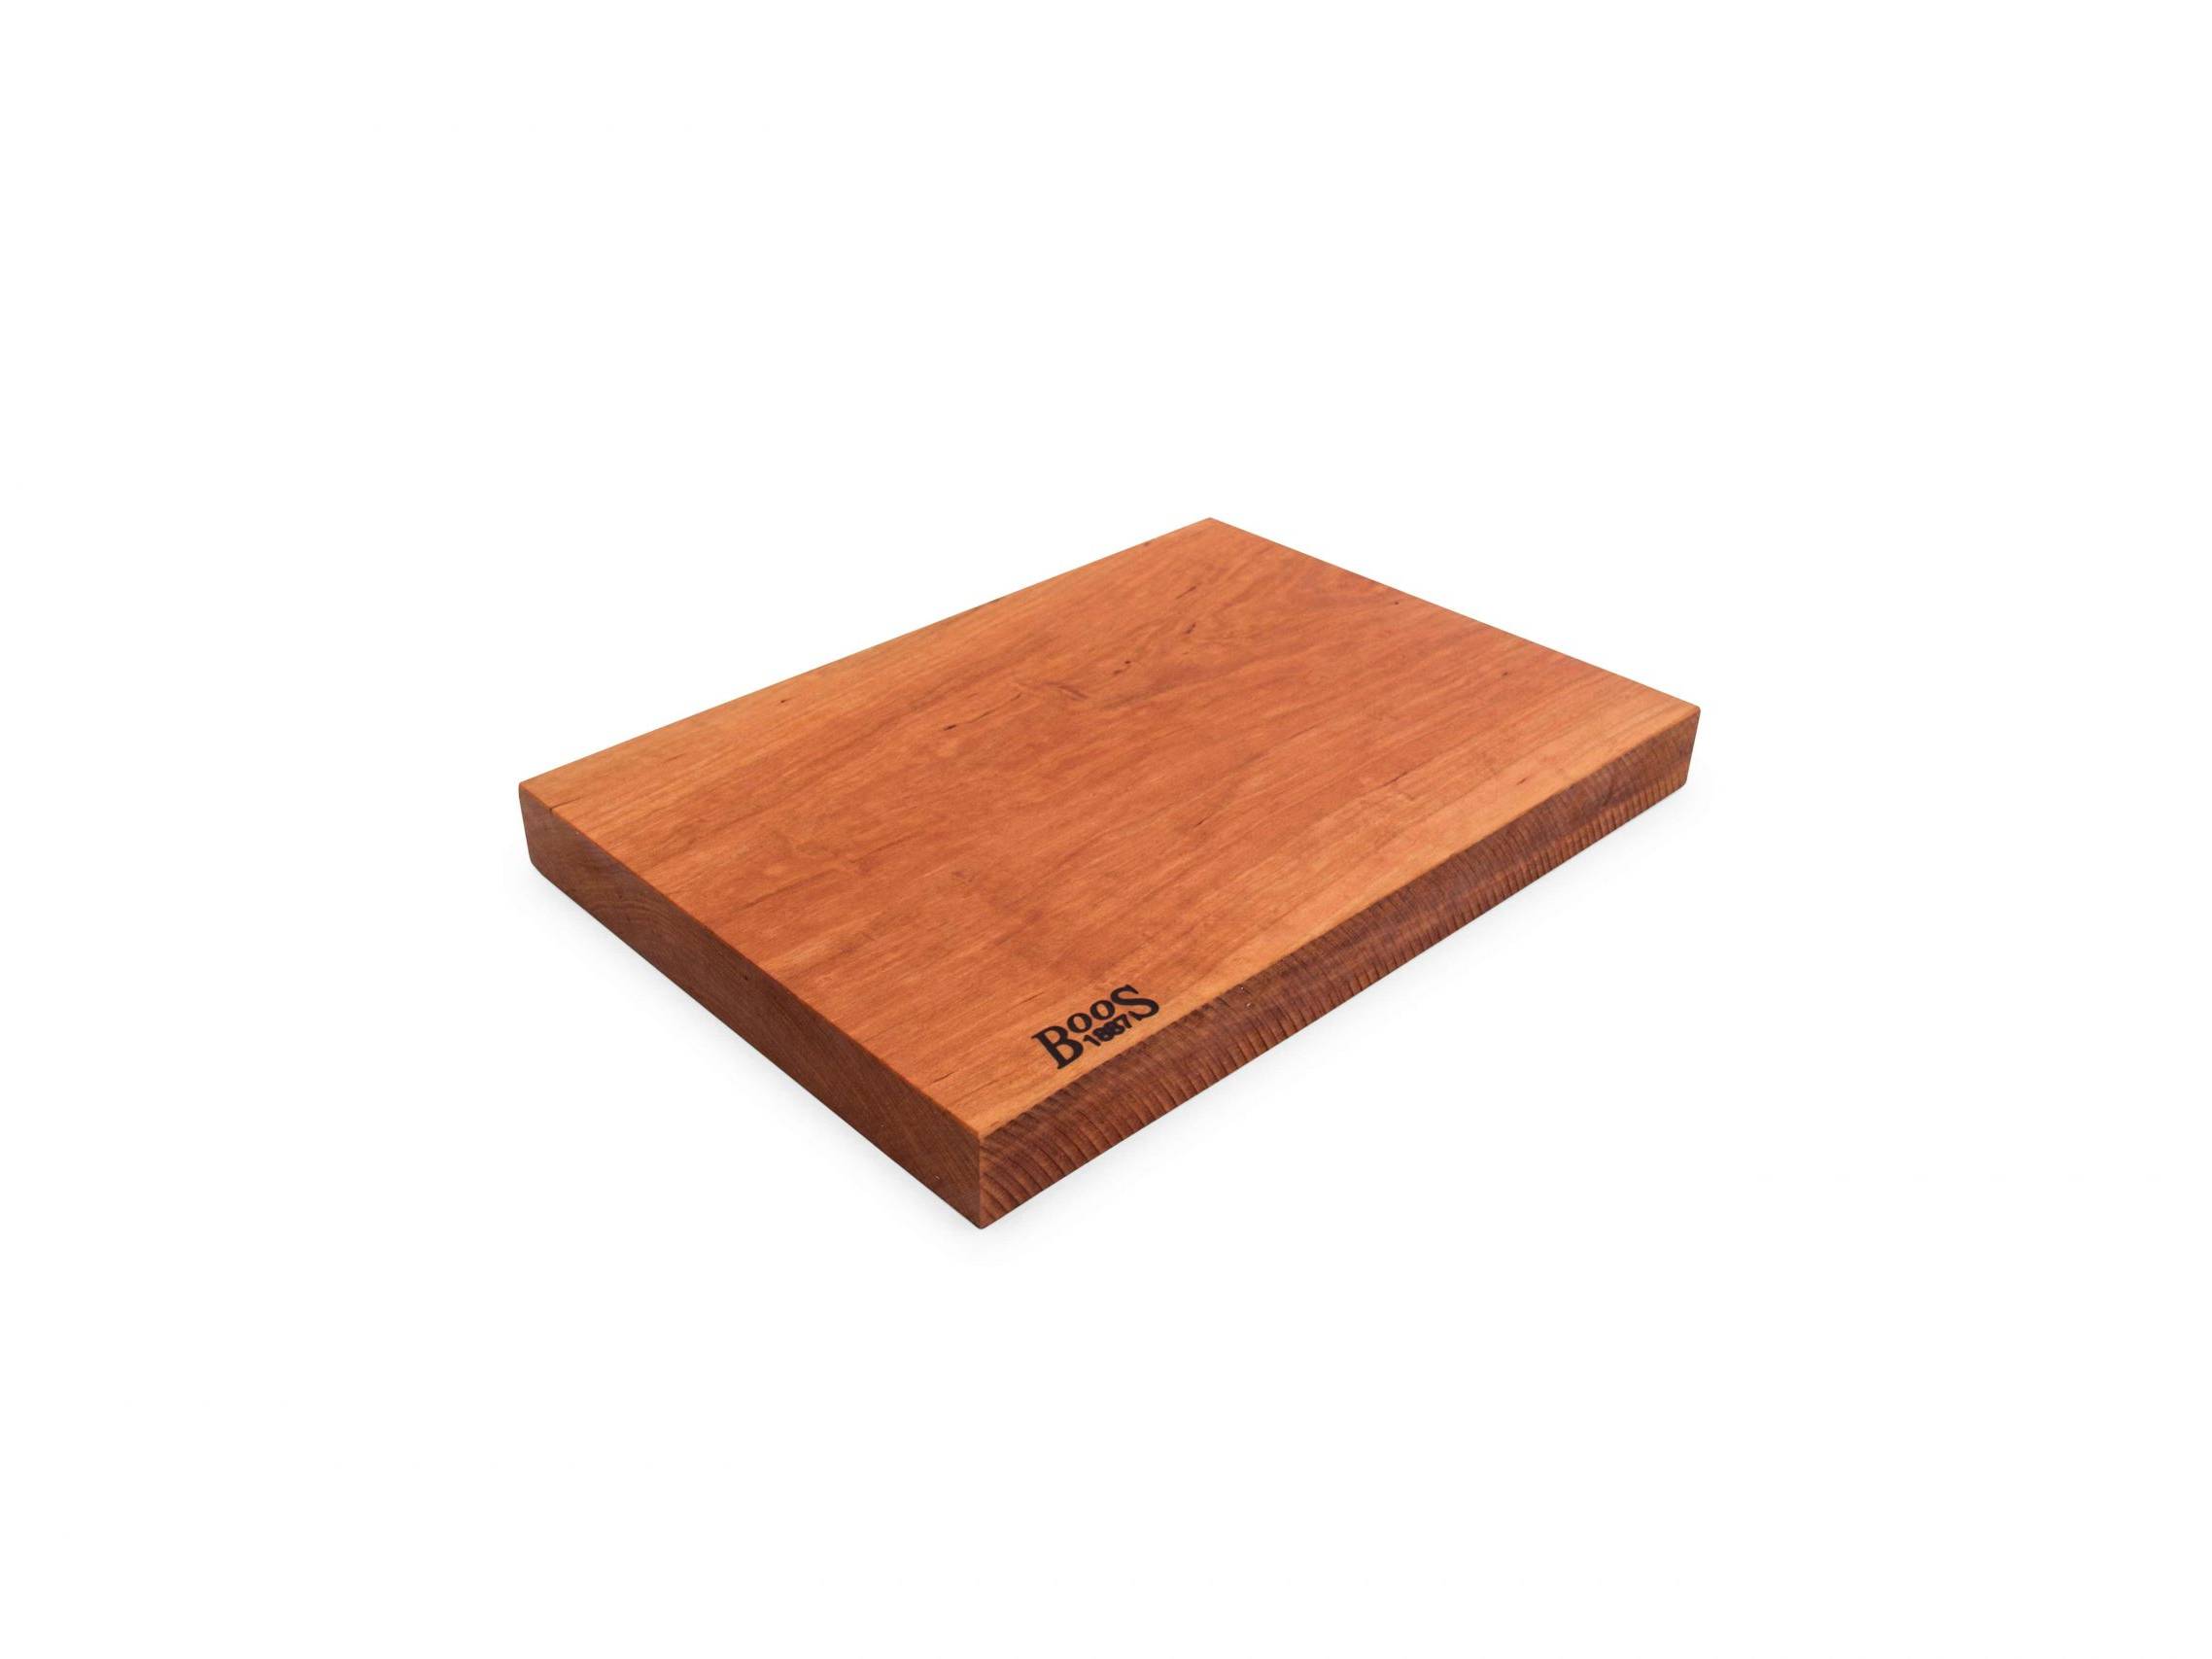 Boos 1887 / Rustic Edge one piece cutting board; American Cherry; can be used on both sides 5